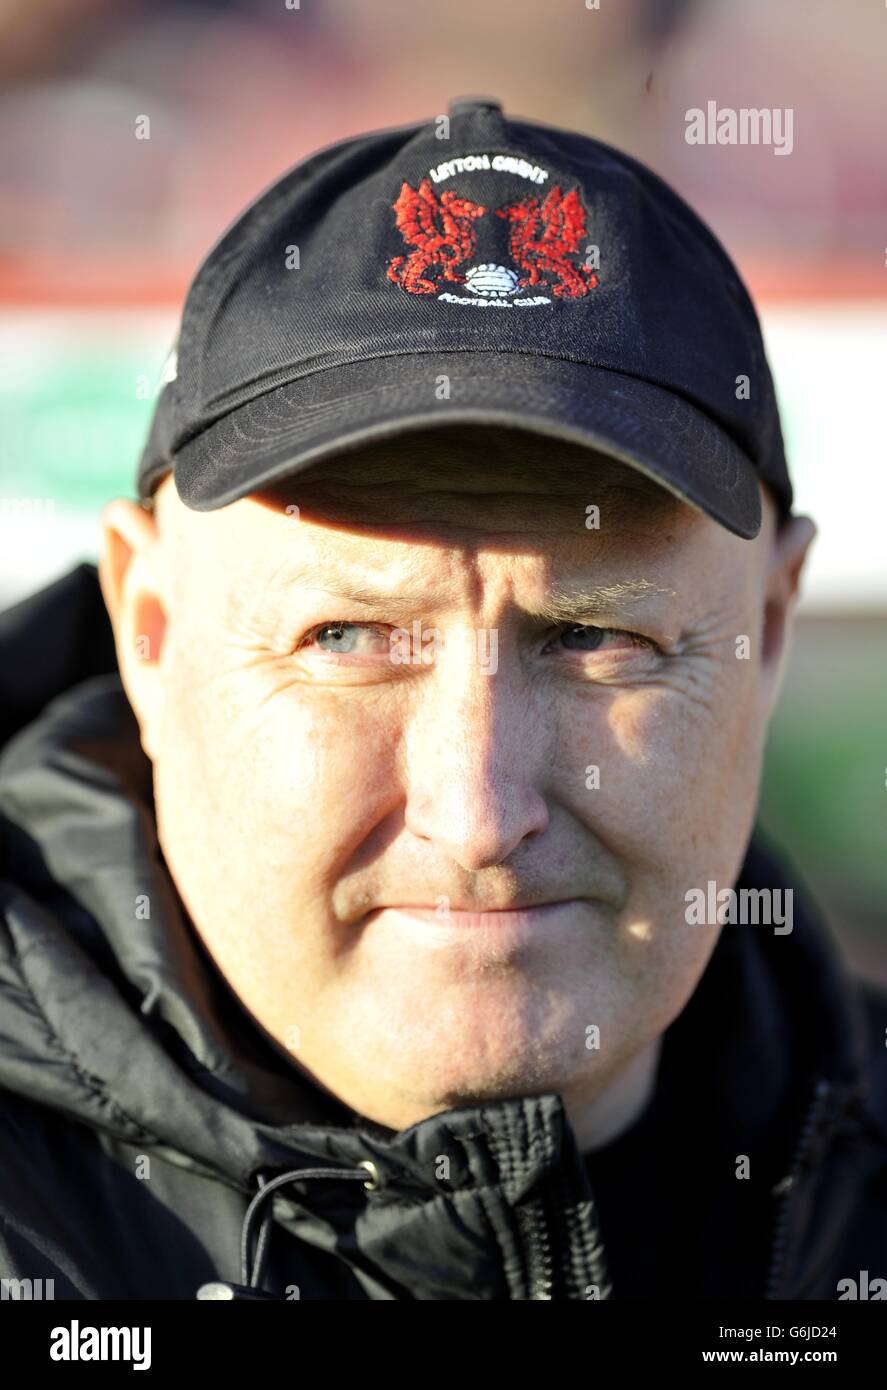 Leyton Orient Manager Russell Slade during the Sky Bet League Two match at the County Ground, Swindon. PRESS ASSOCIATION Photo. Picture date: Saturday November 23, 2013. See PA story SOCCER Swindon. Photo credit should read: PA Wire. Stock Photo